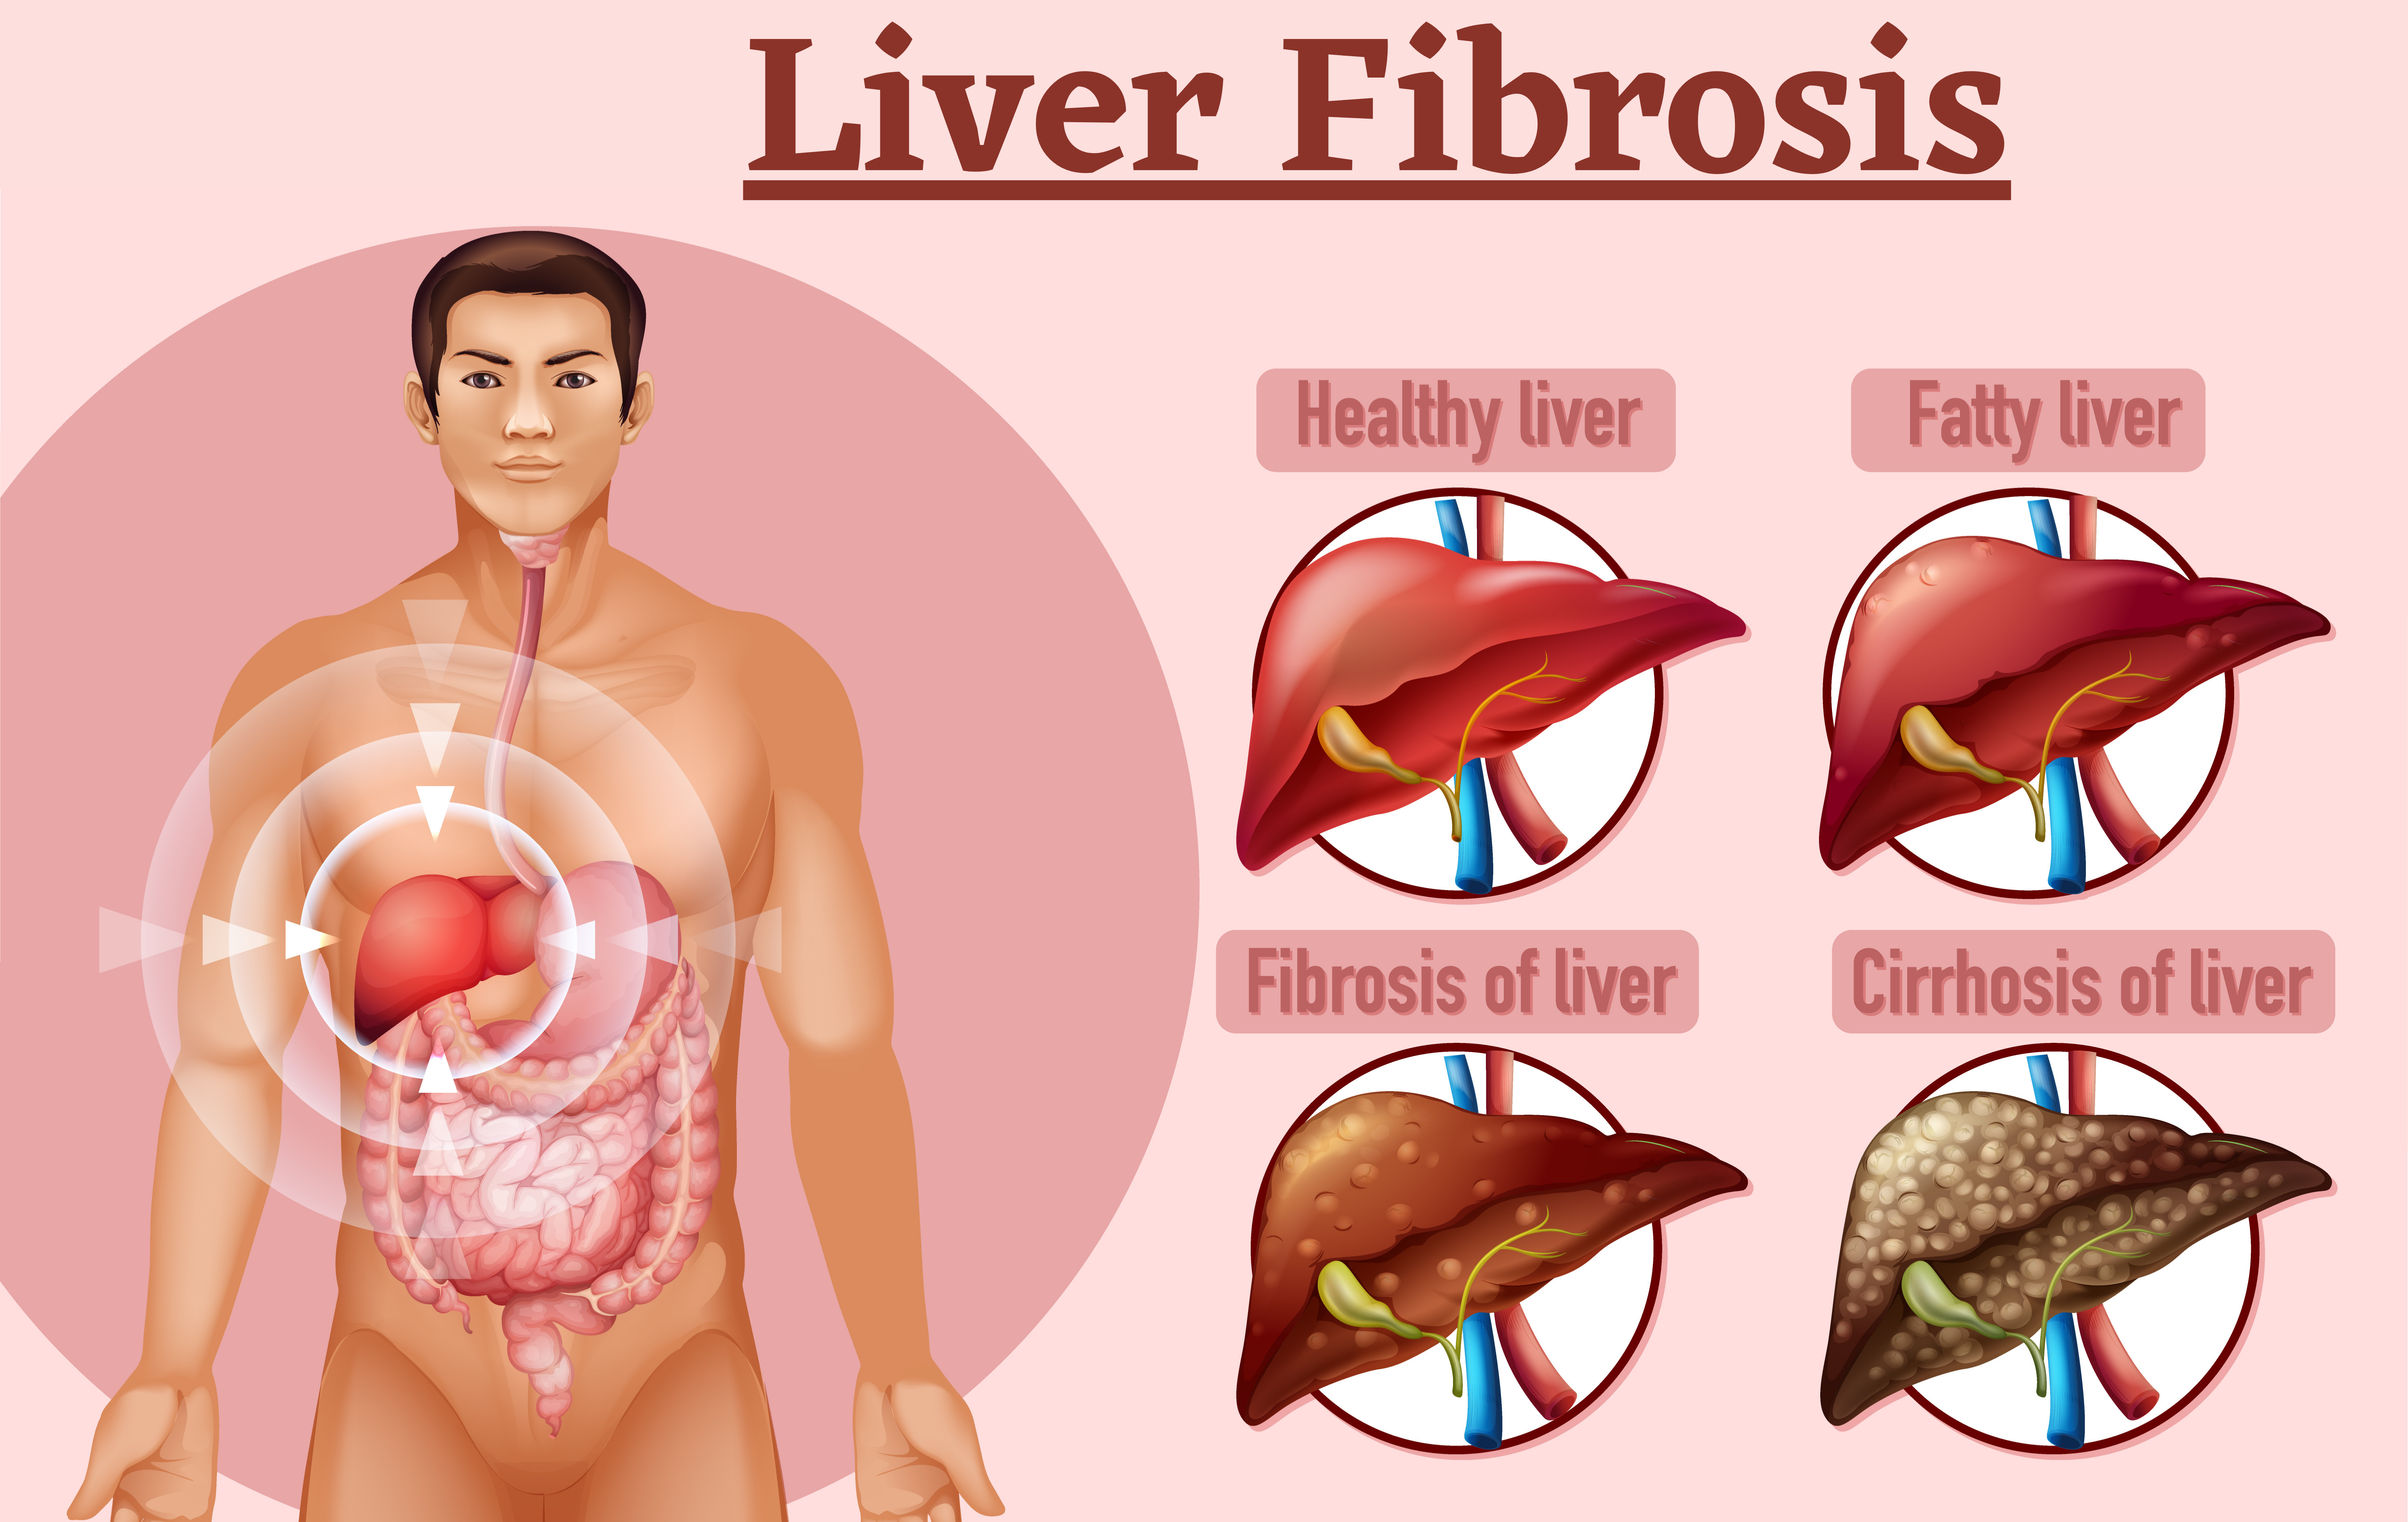 Liver fibrosis: Stages, symptoms, and treatment